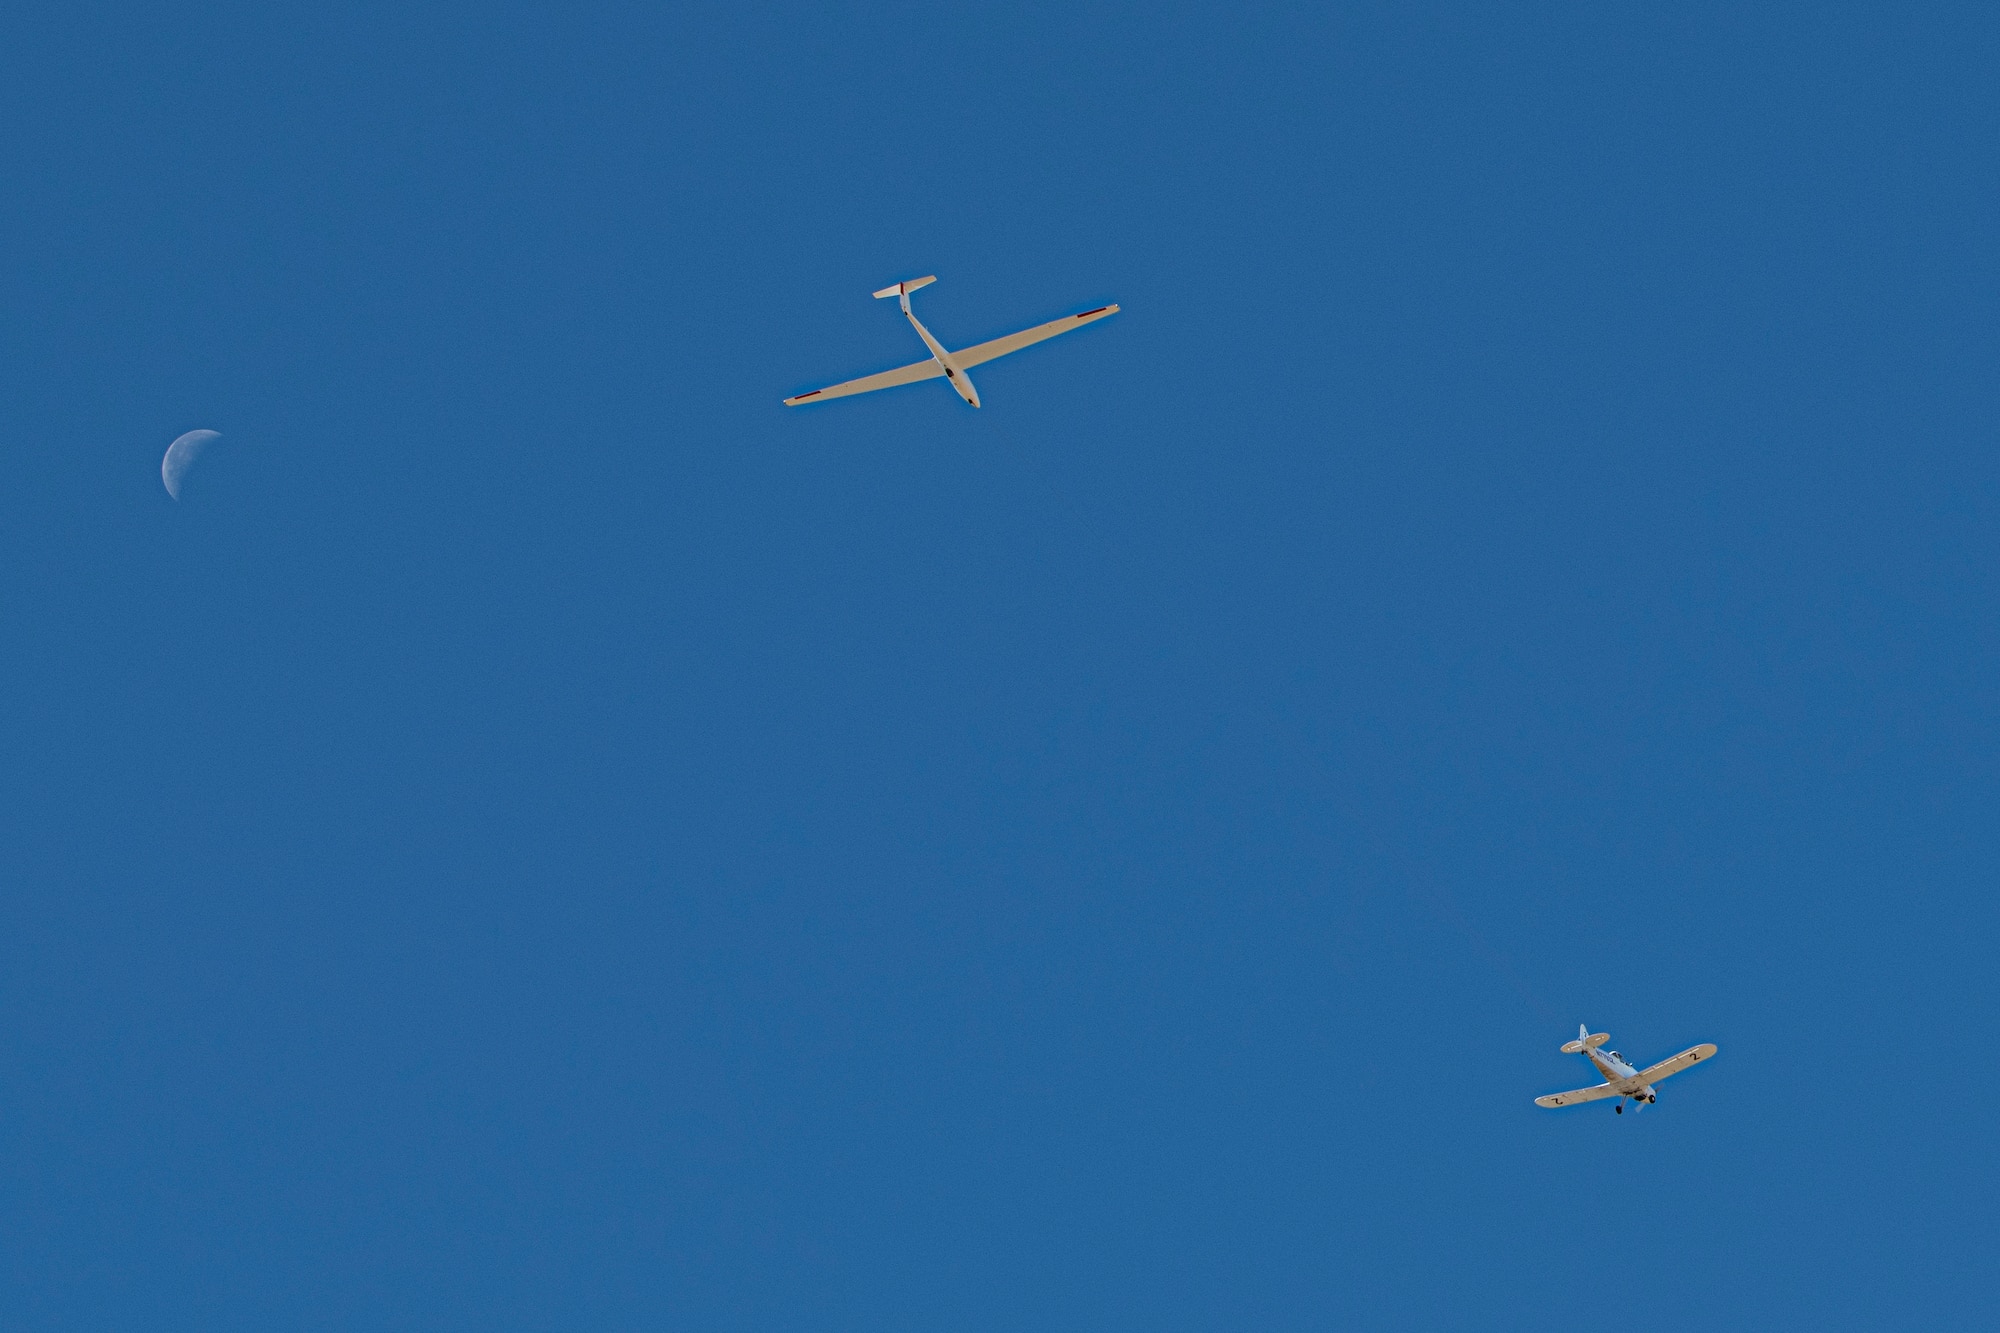 Glider being towed by plane with moon in background